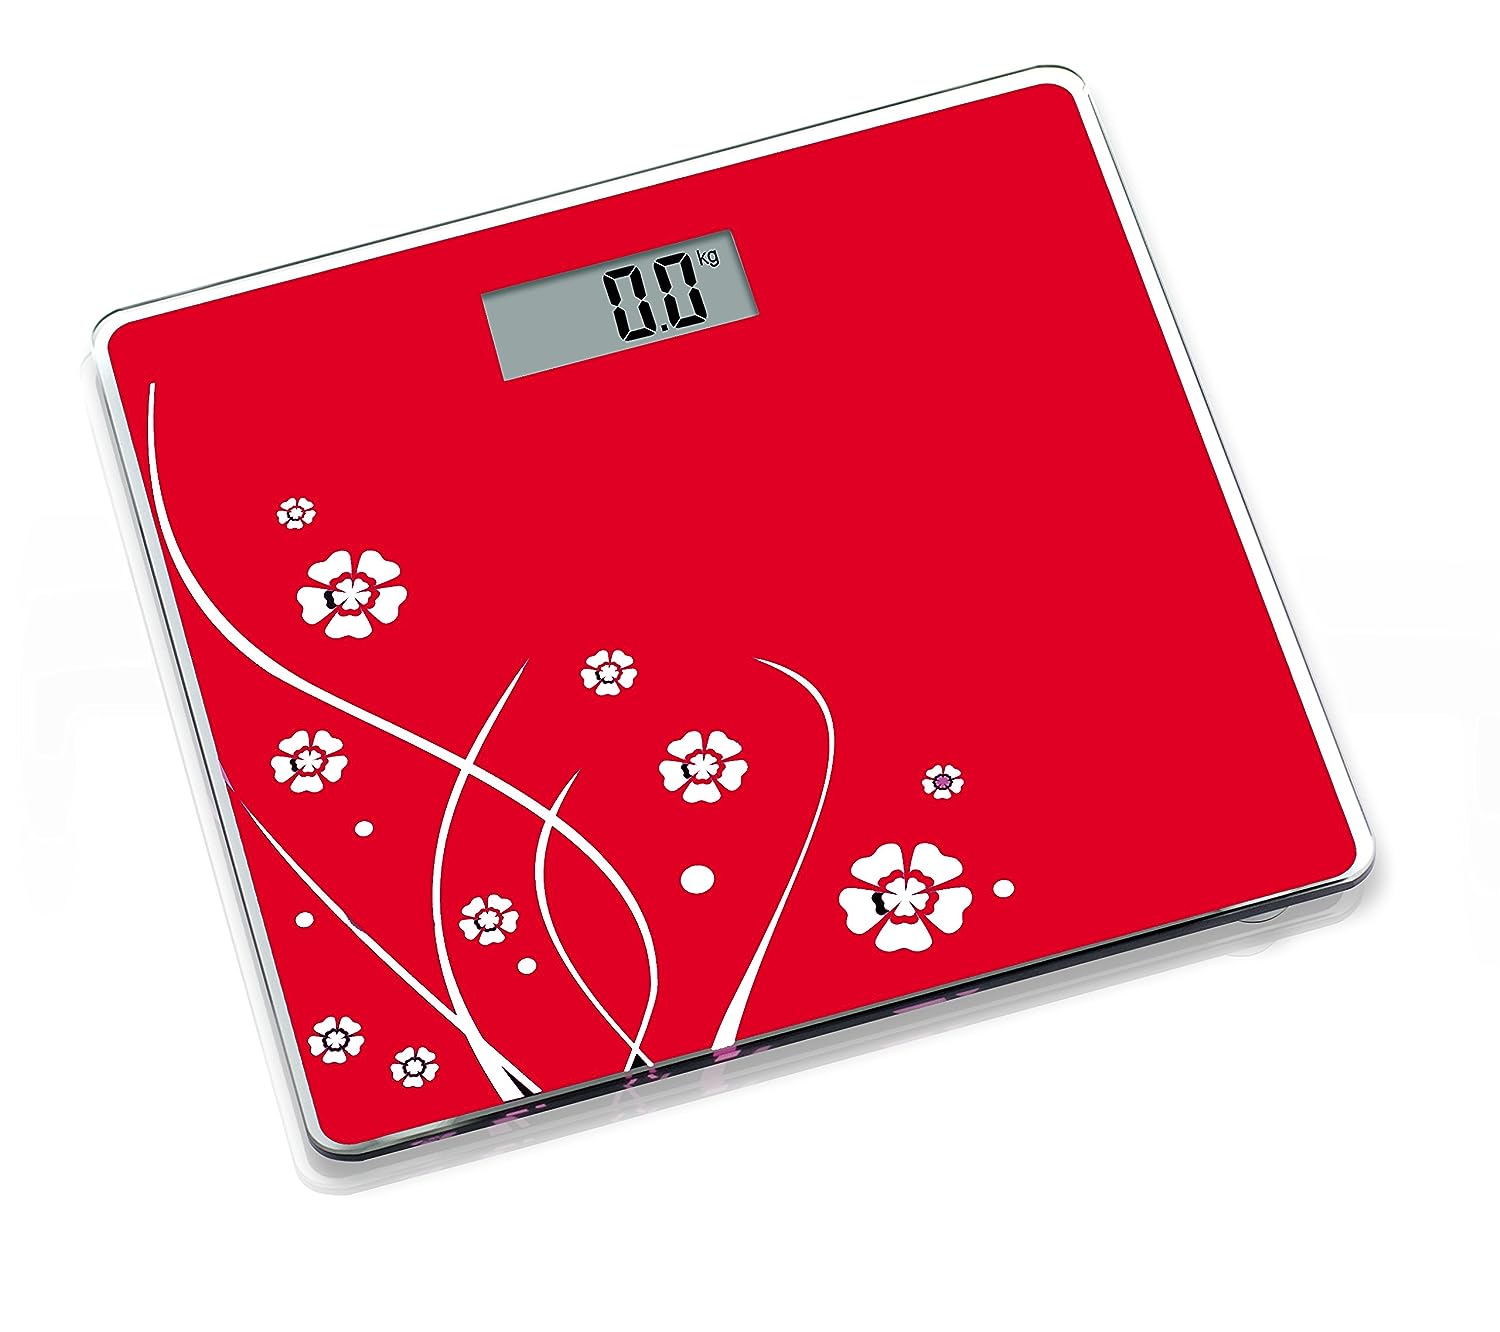 Venus (India) Personal Electronic Digital LCD Weight Machine Body Fitness Weighing Bathroom Scale Weight Machine